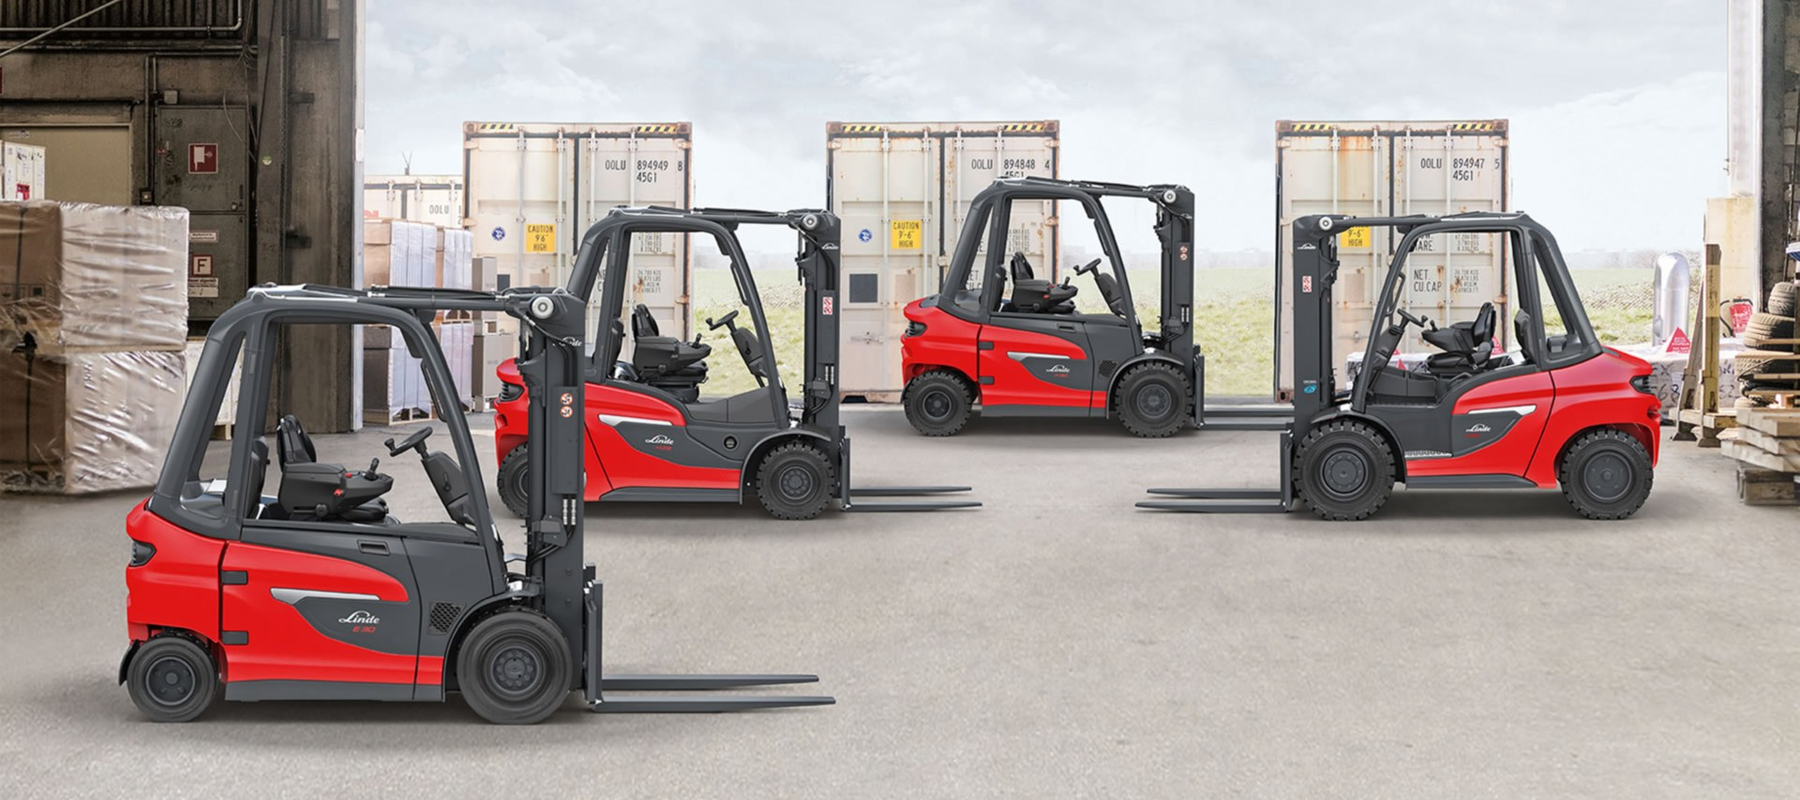 Multiple Linde Forklifts in a Warehouse